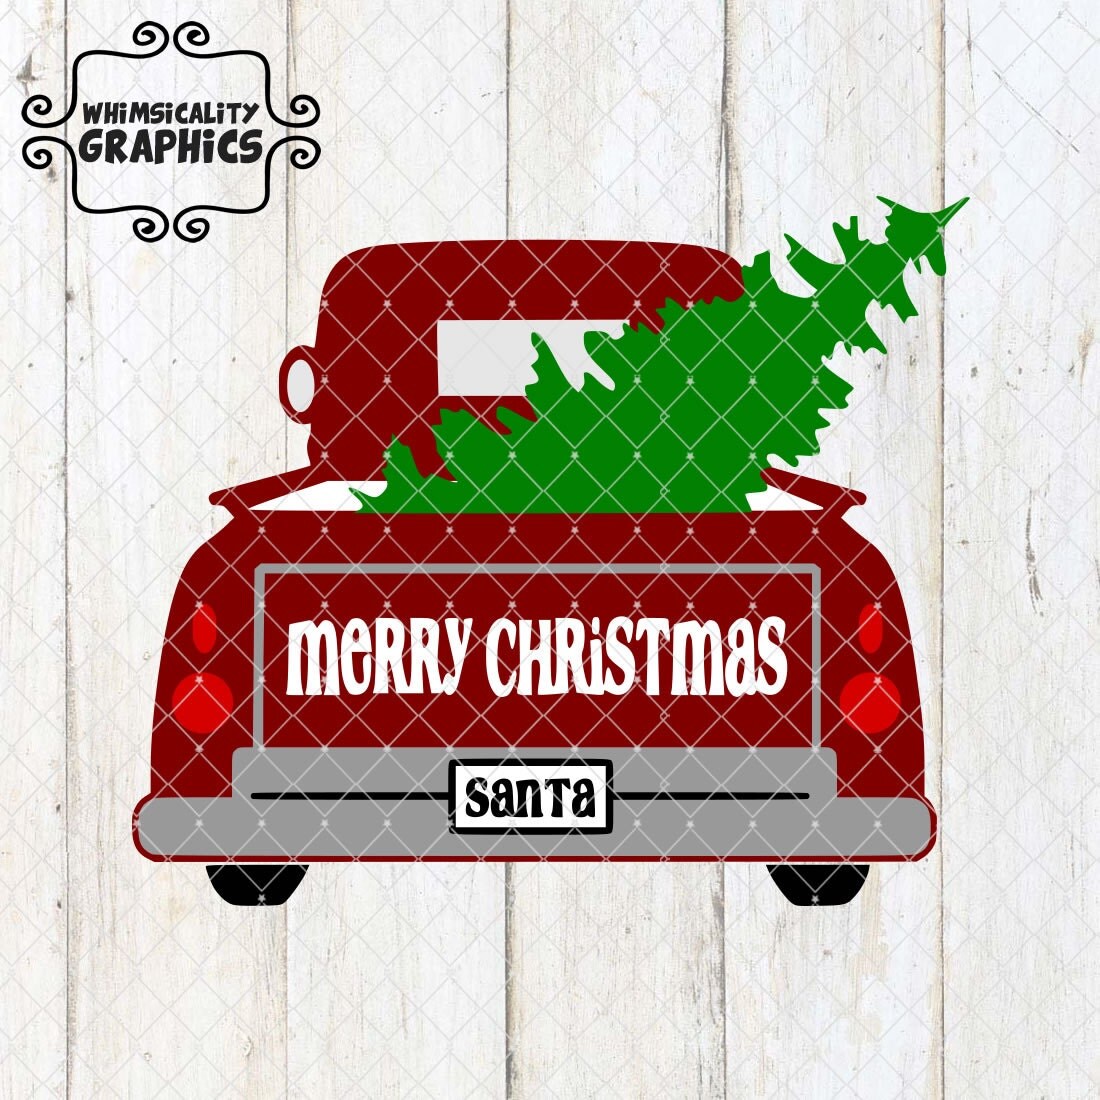 Download Christmas Santa's Antique Truck With Tree with svg dxf